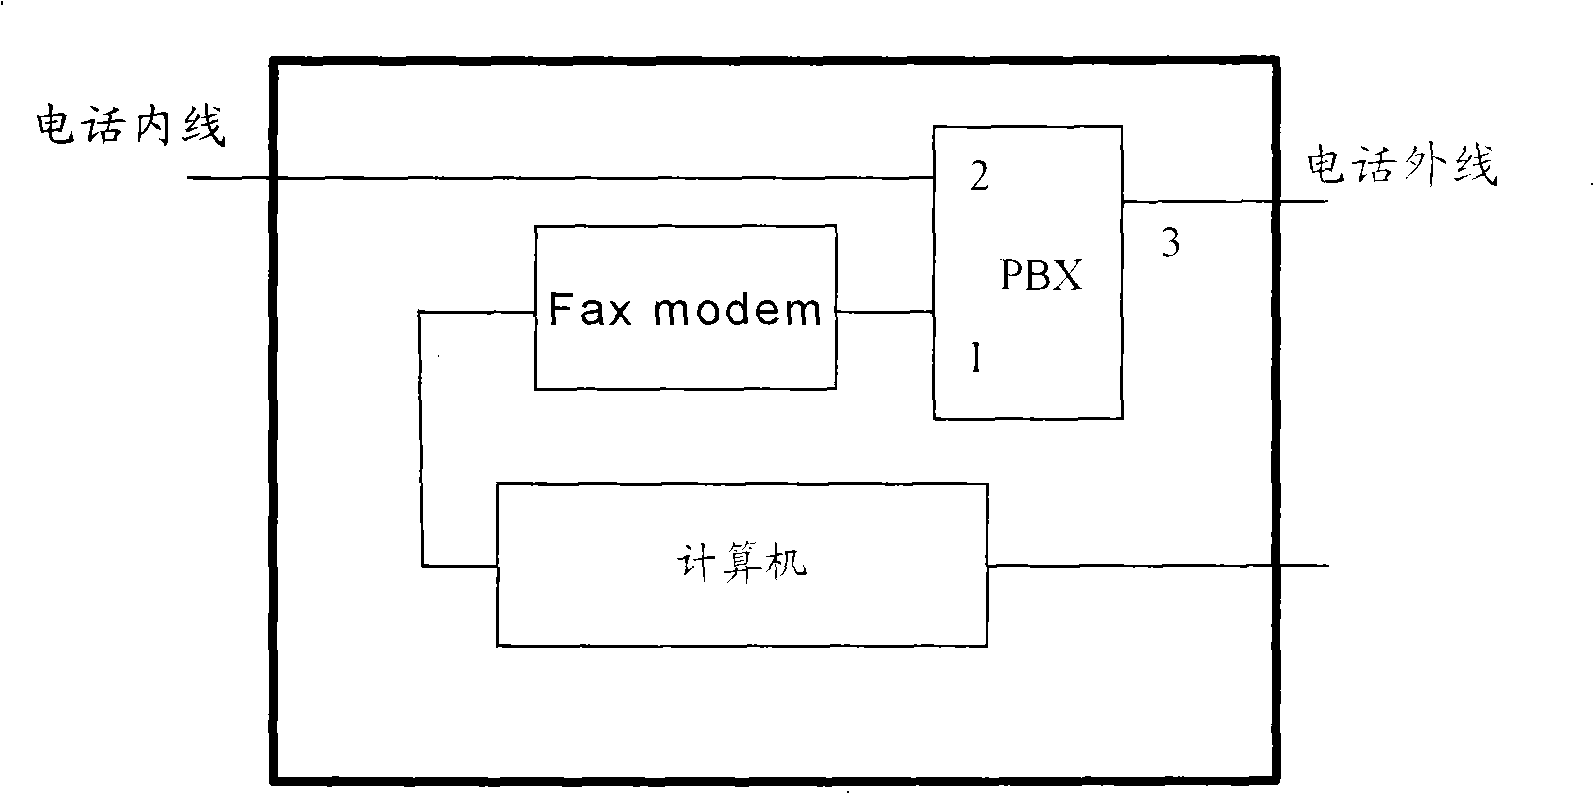 Network fax converter, central network fax service system and network fax method